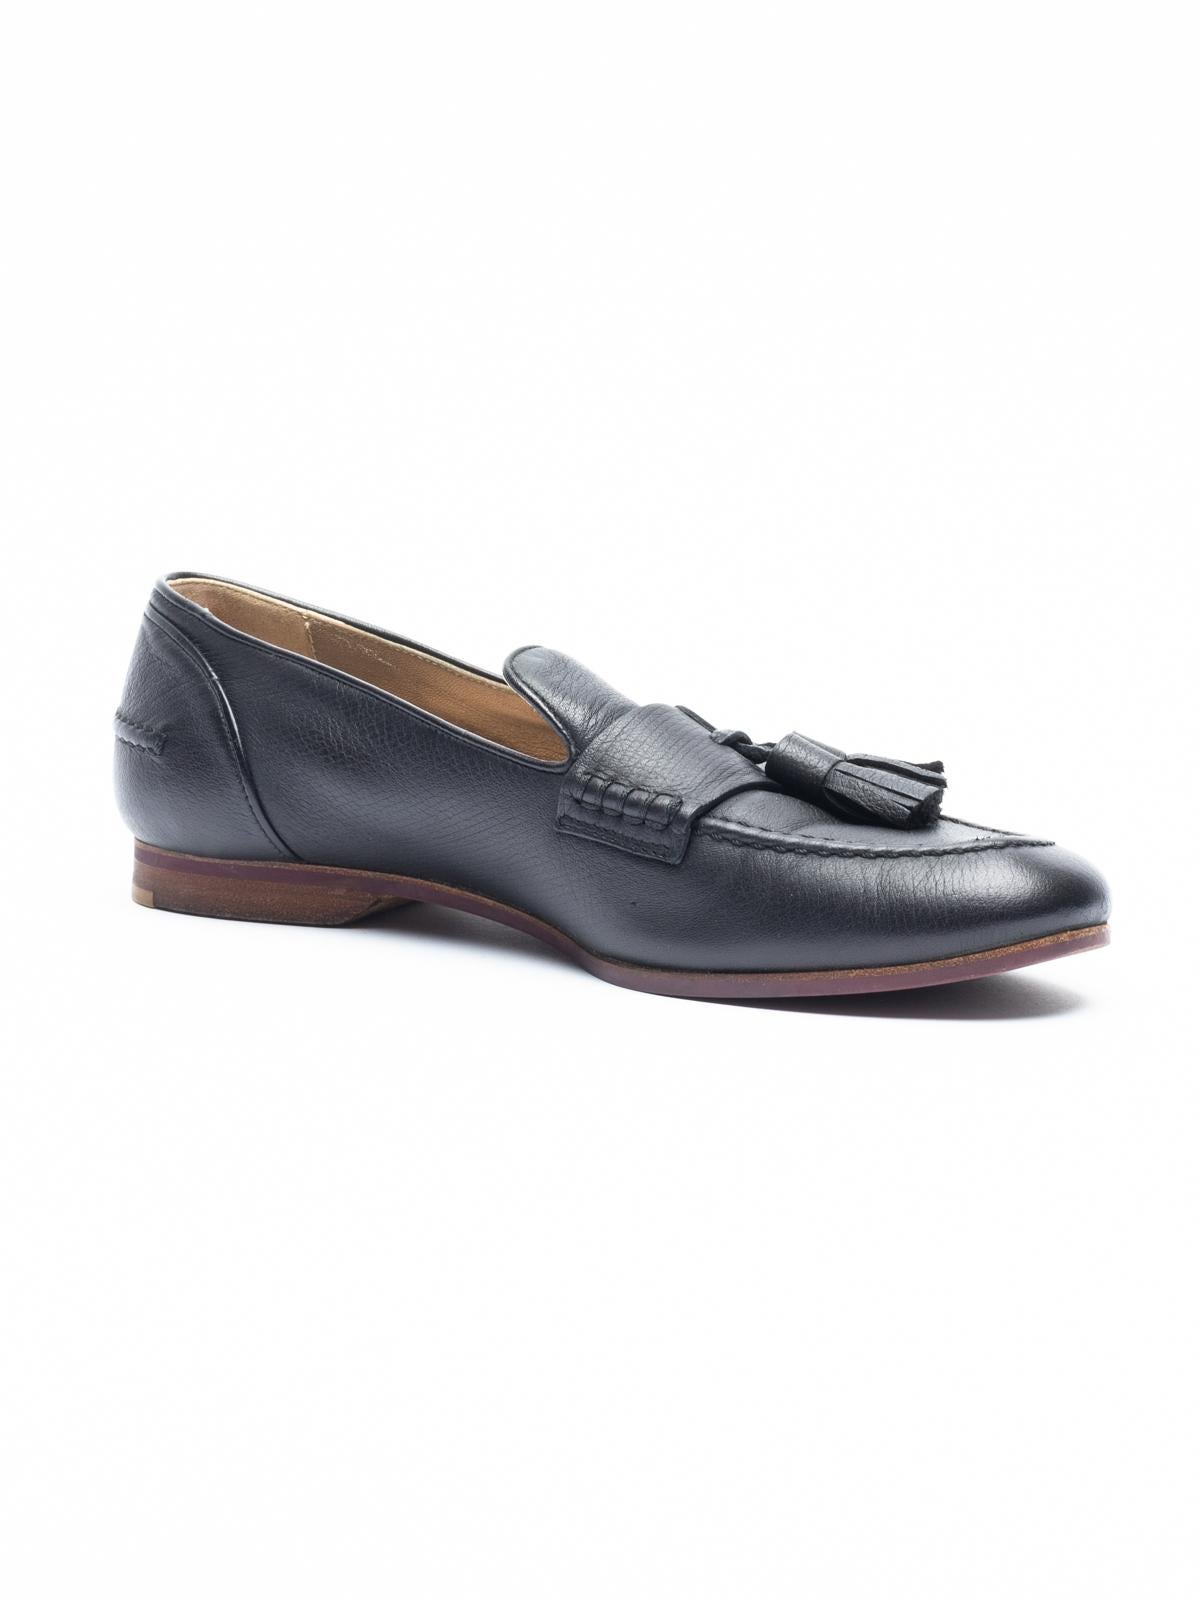 CONDITION is Good. These shoes have light general creasing to the exterior leather, as well as visible wear to the interior sole. The exterior soles are in good condition, with some visible wear. Details Navy Made In Italy Tassel Front Detail Comes